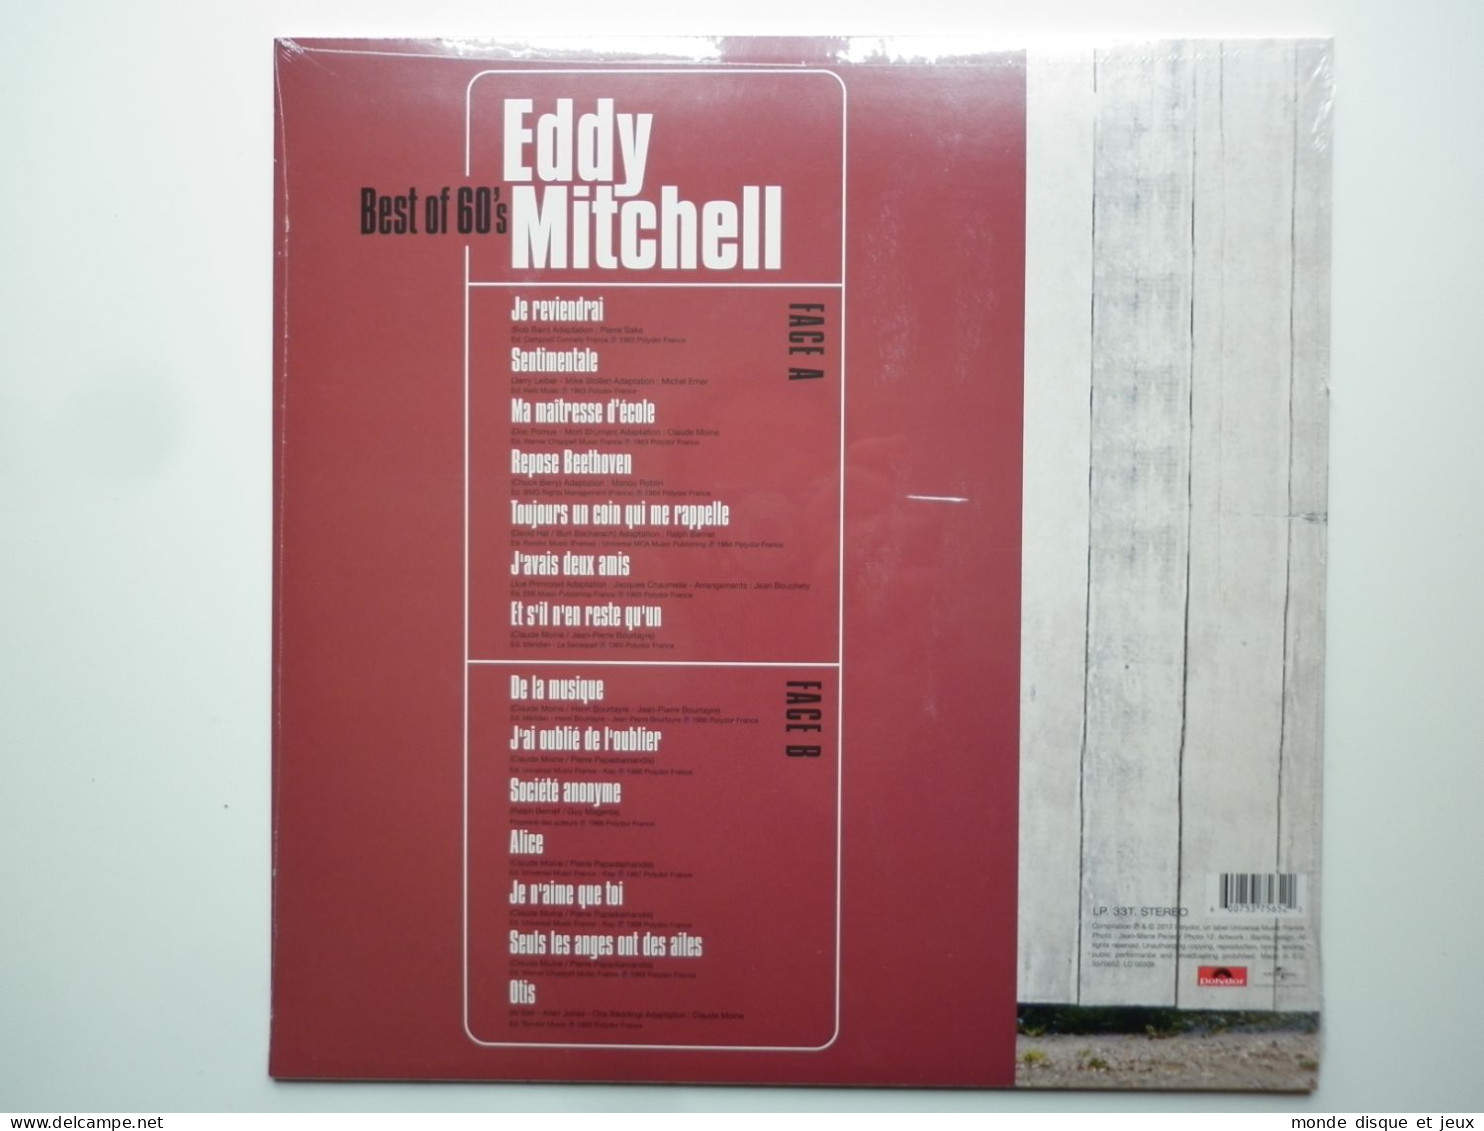 Eddy Mitchell Album 33Tours Vinyle Best Of 60's - Other - French Music